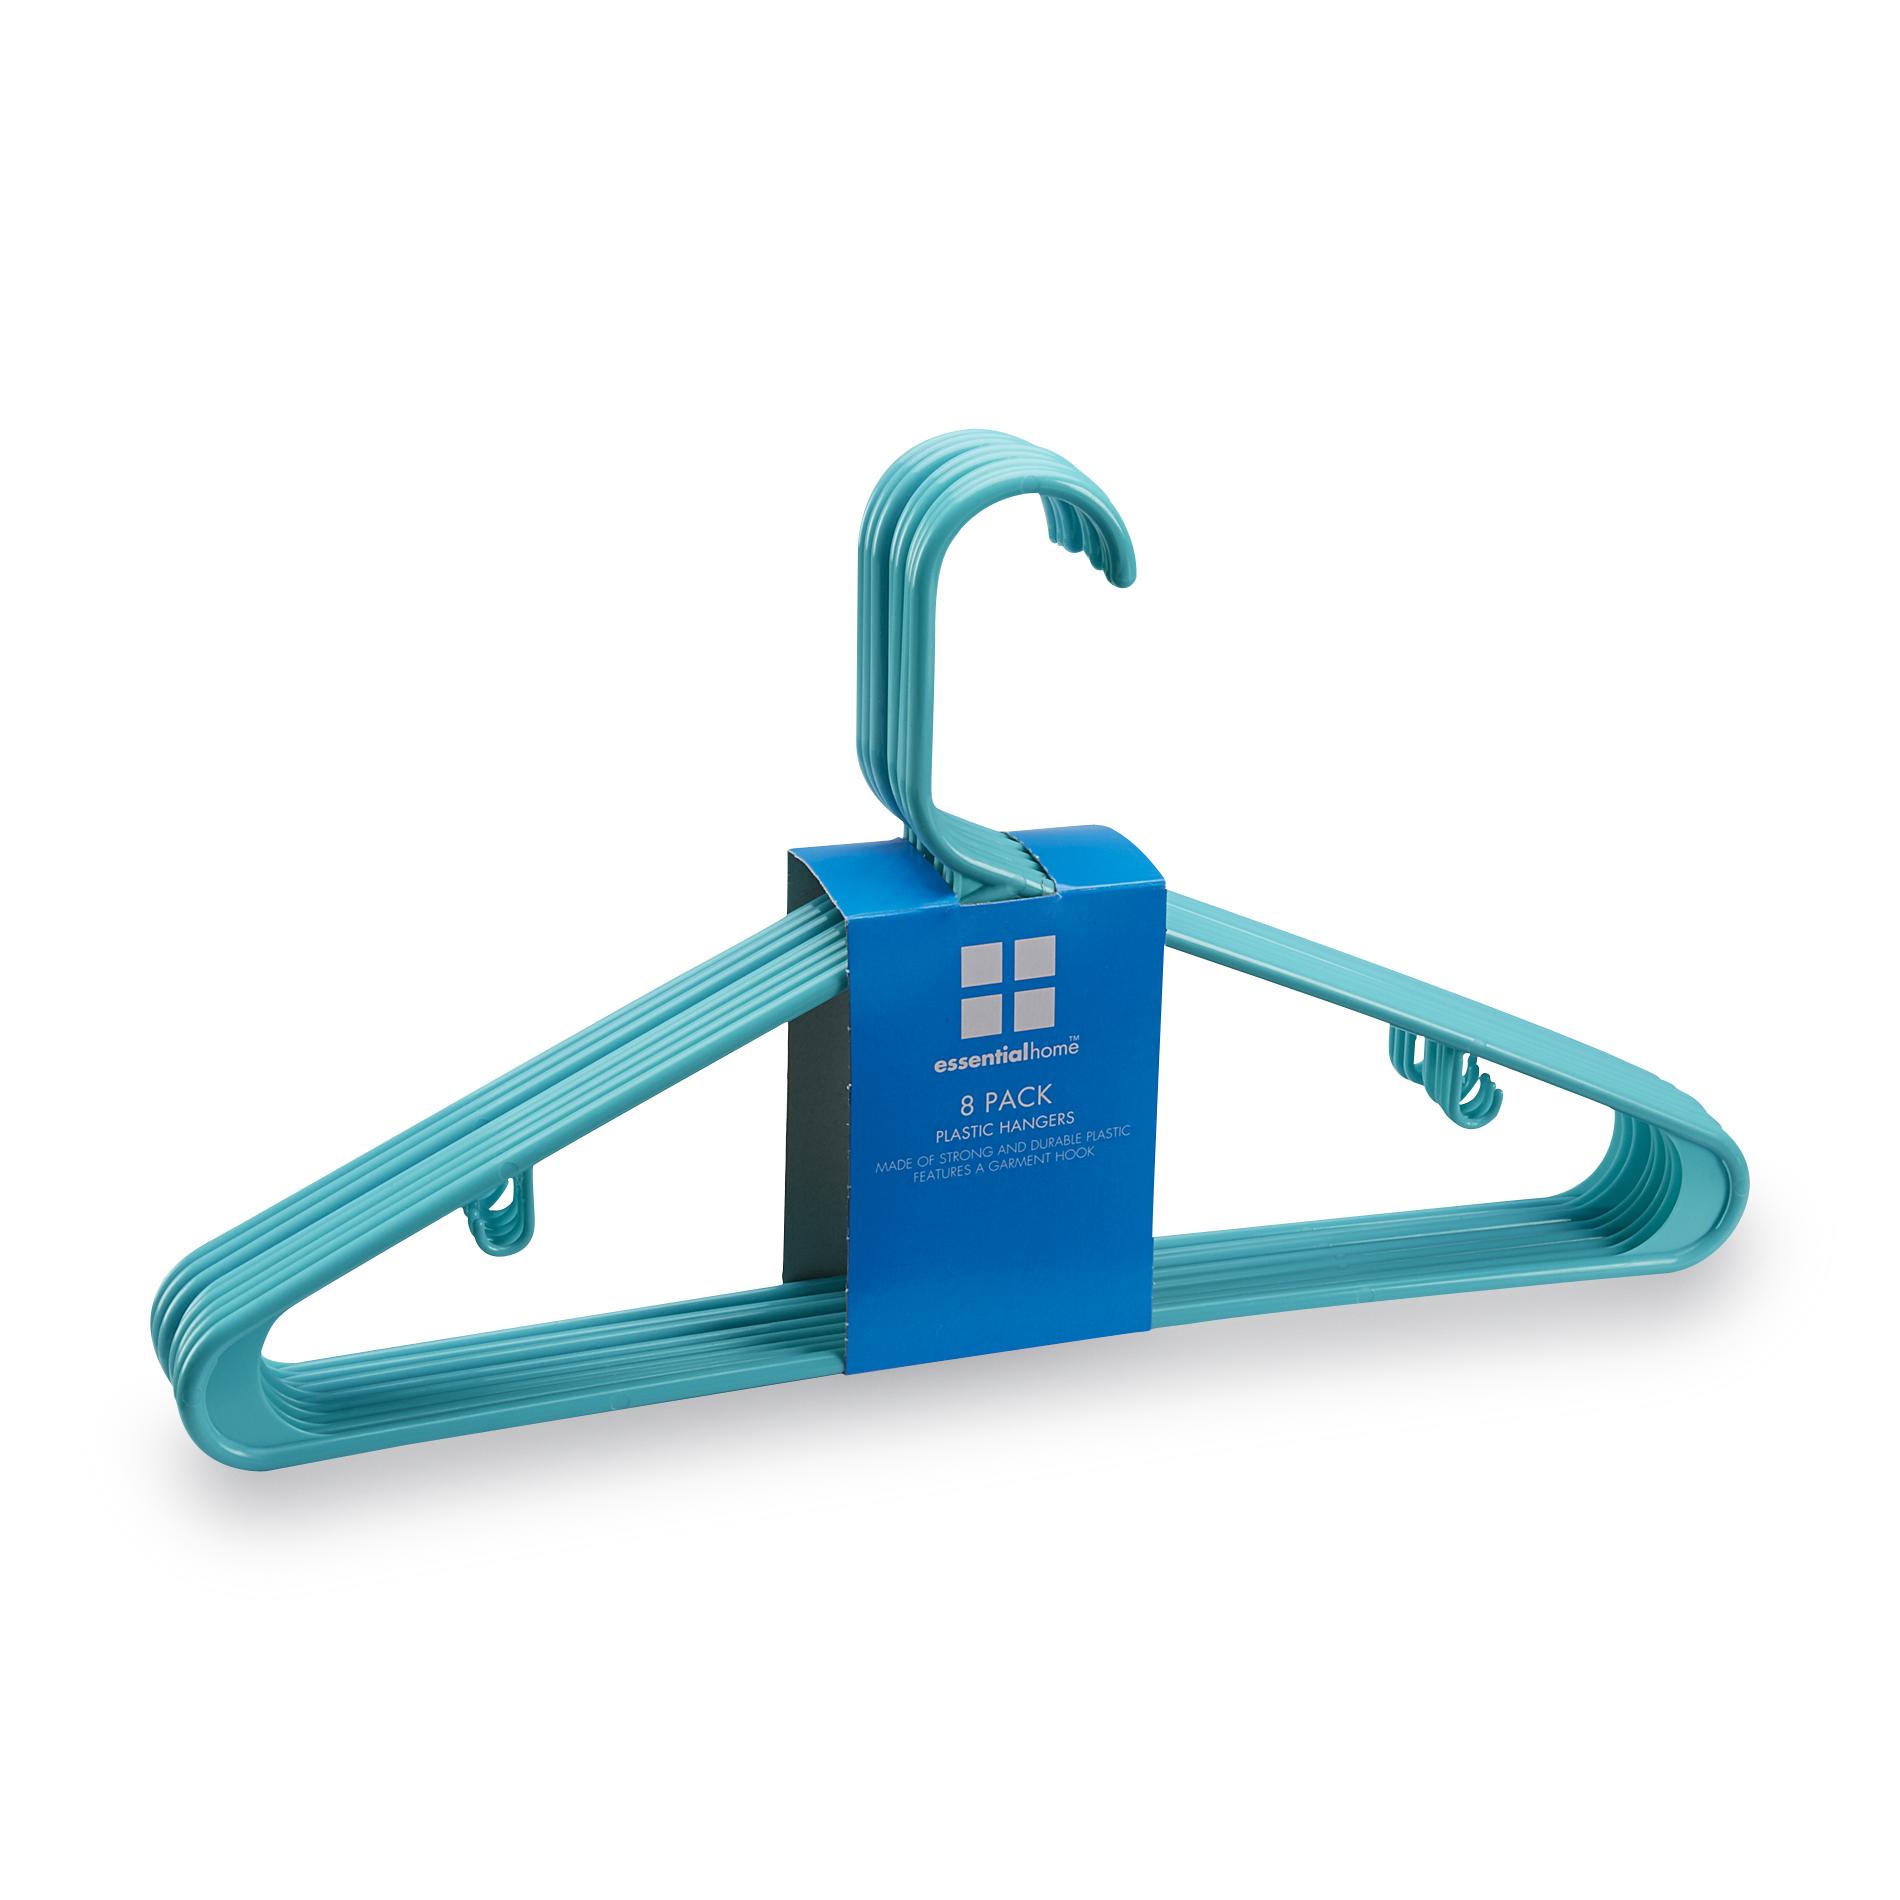 Essential Home 8-Pack Colored Plastic Hangers